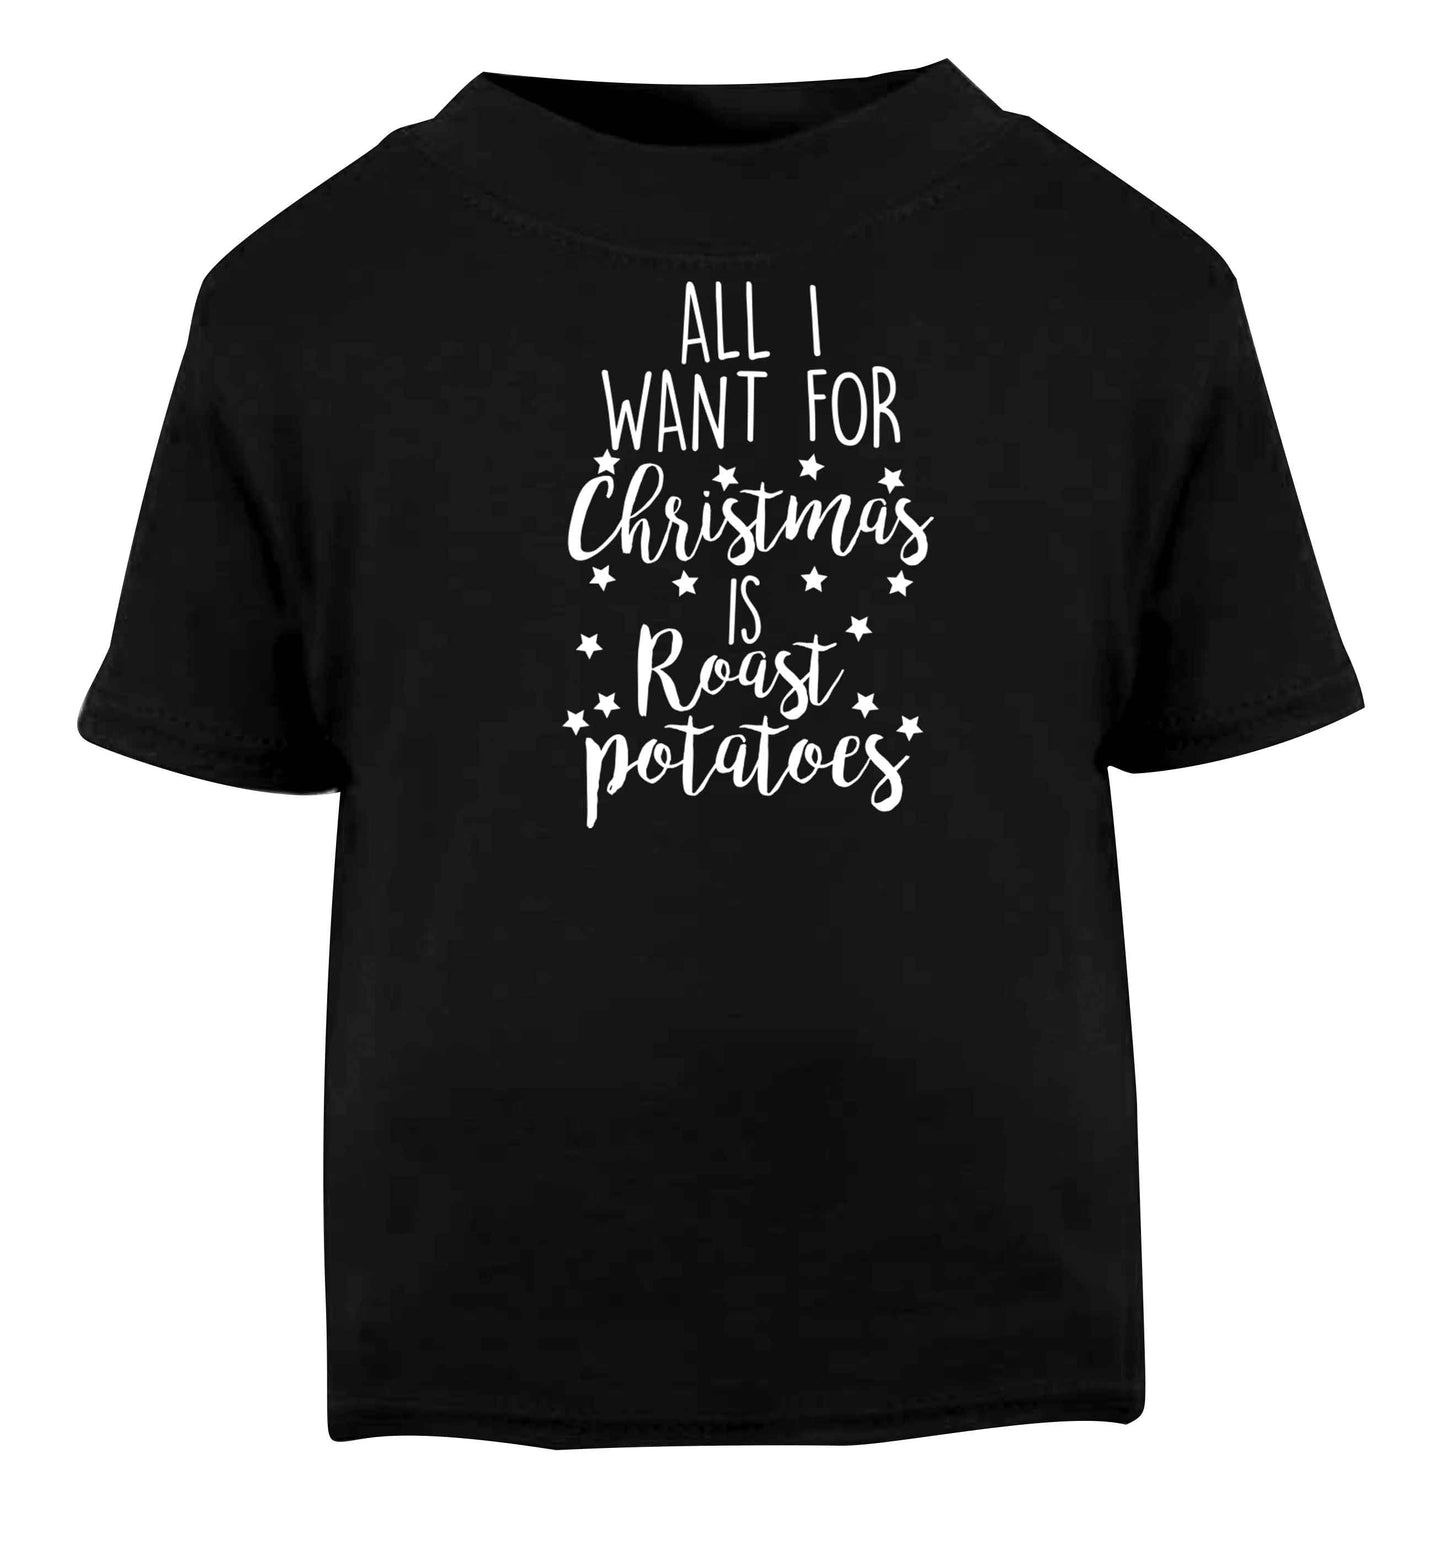 All I want for Christmas is roast potatoes Black baby toddler Tshirt 2 years